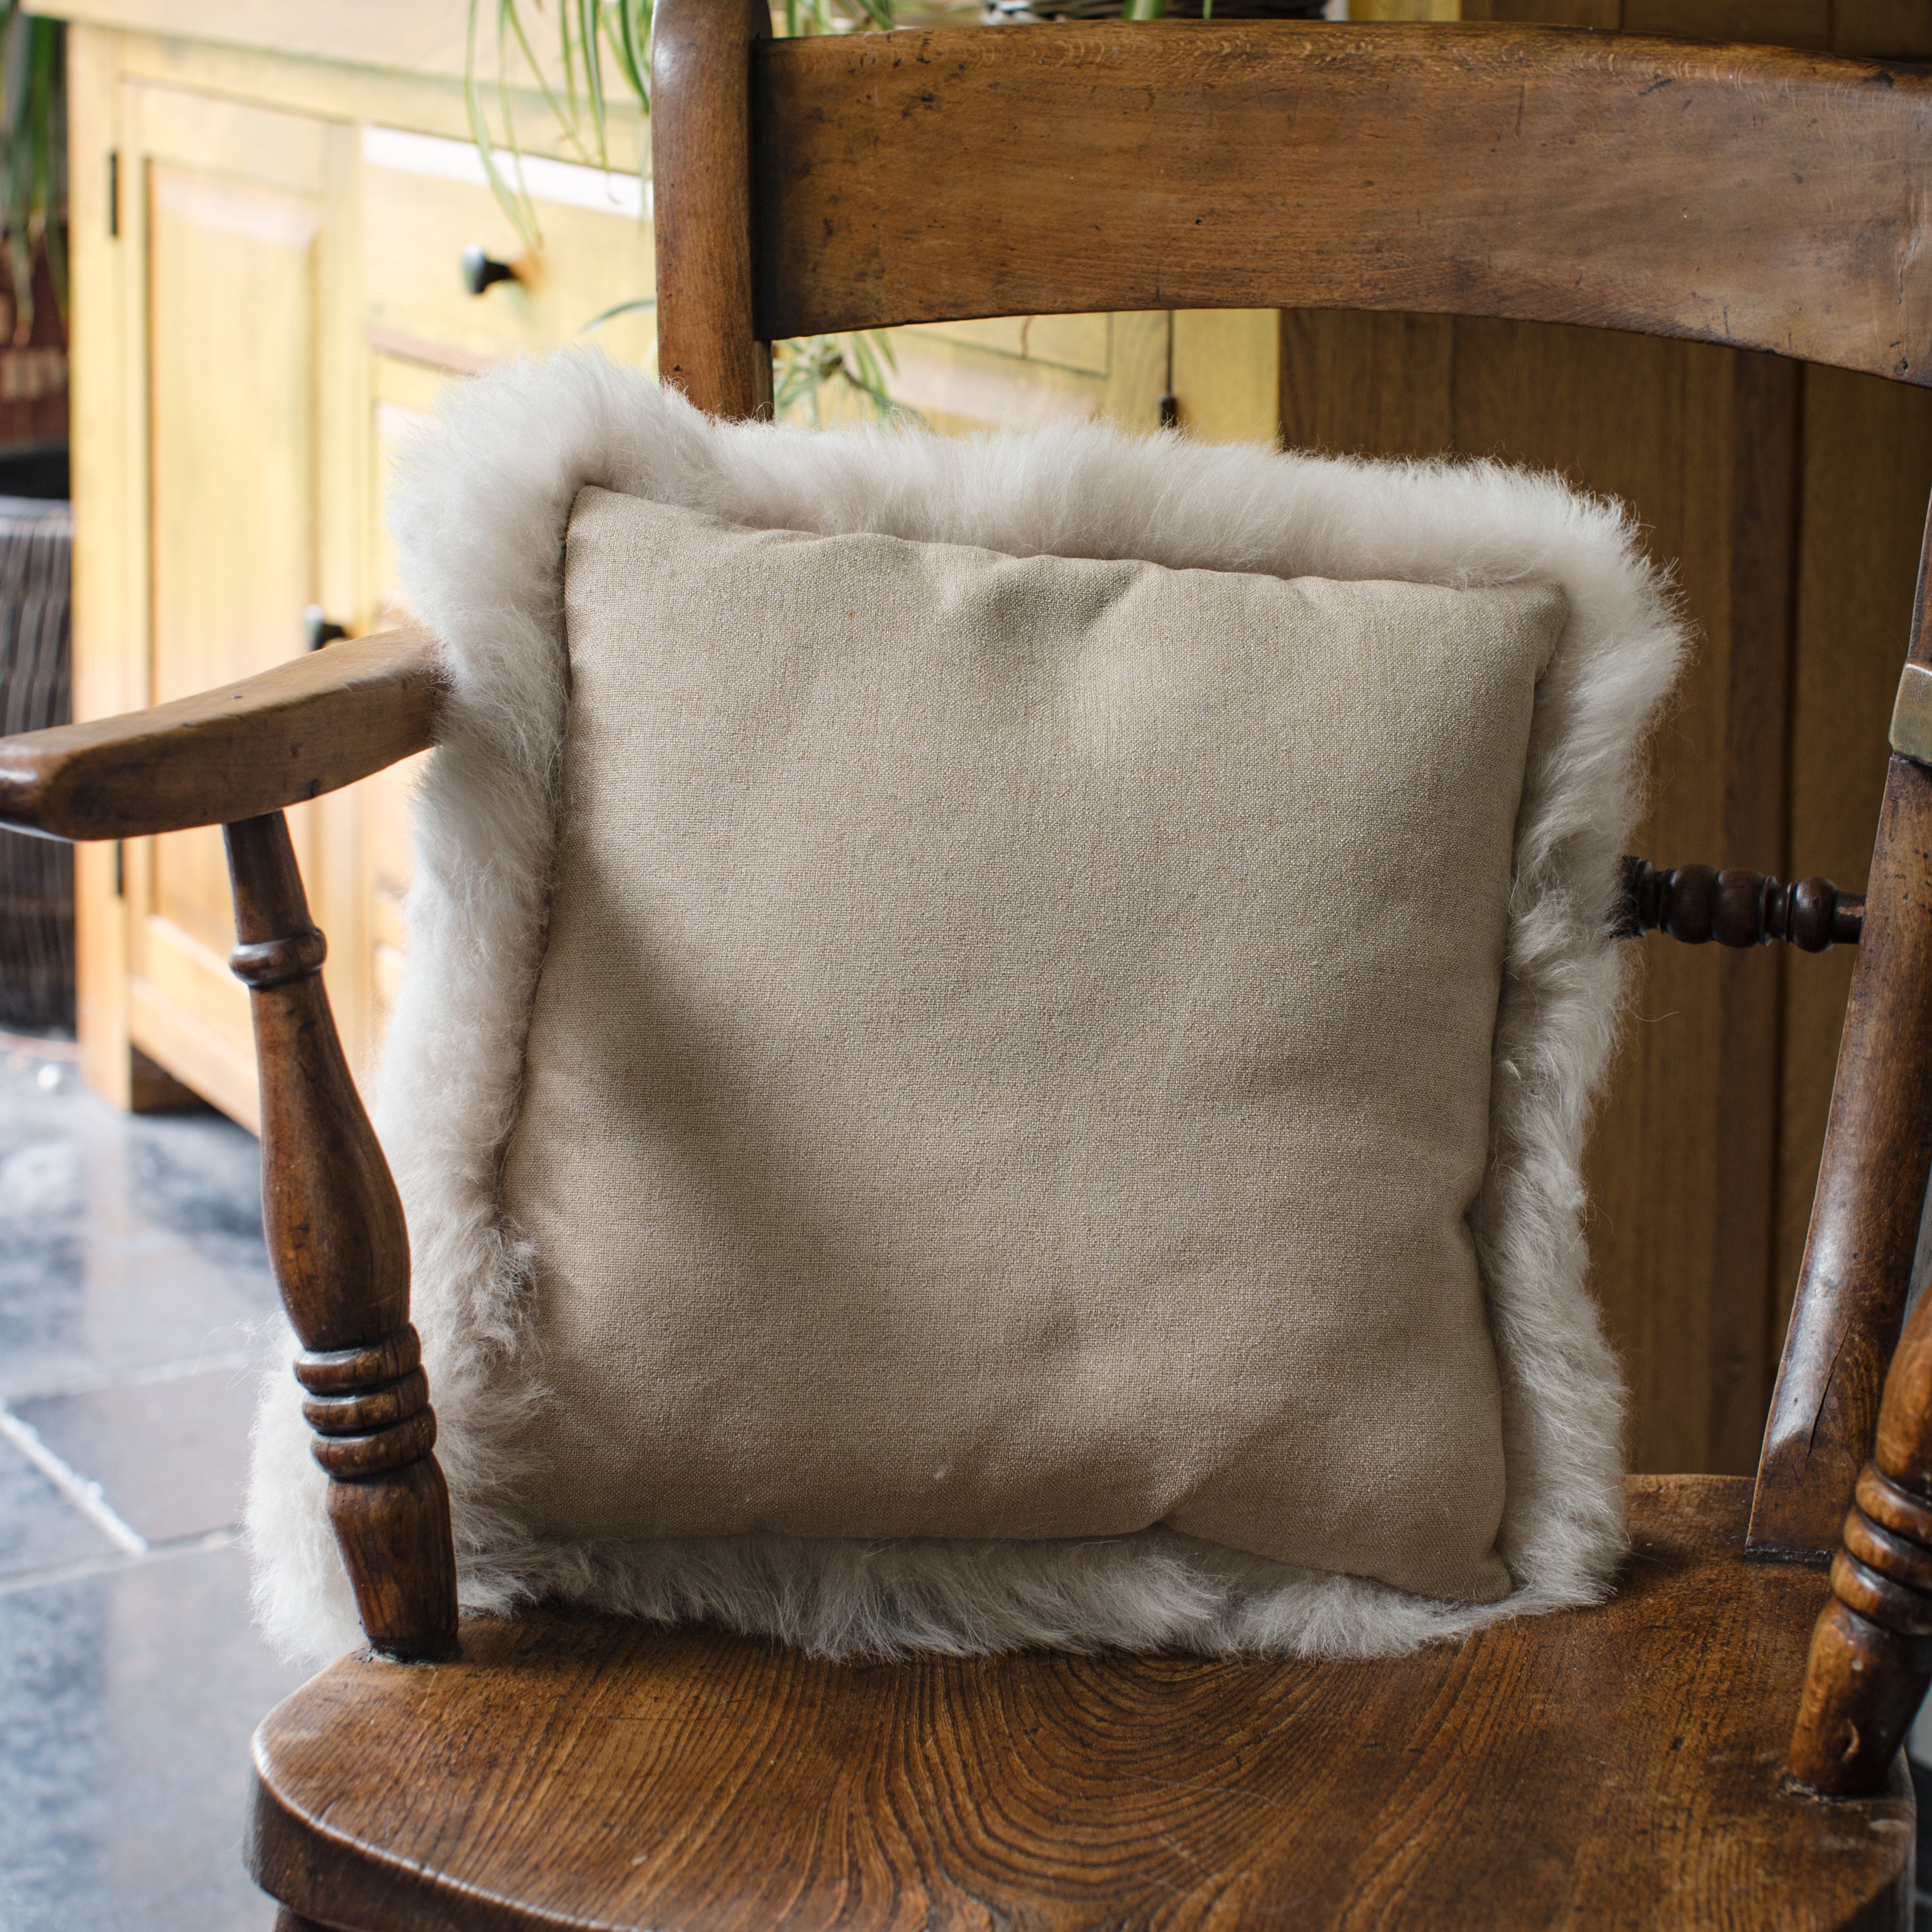 Luxury Icelandic Shorn Sheepskin Cushion with a Cotton Back in Linen